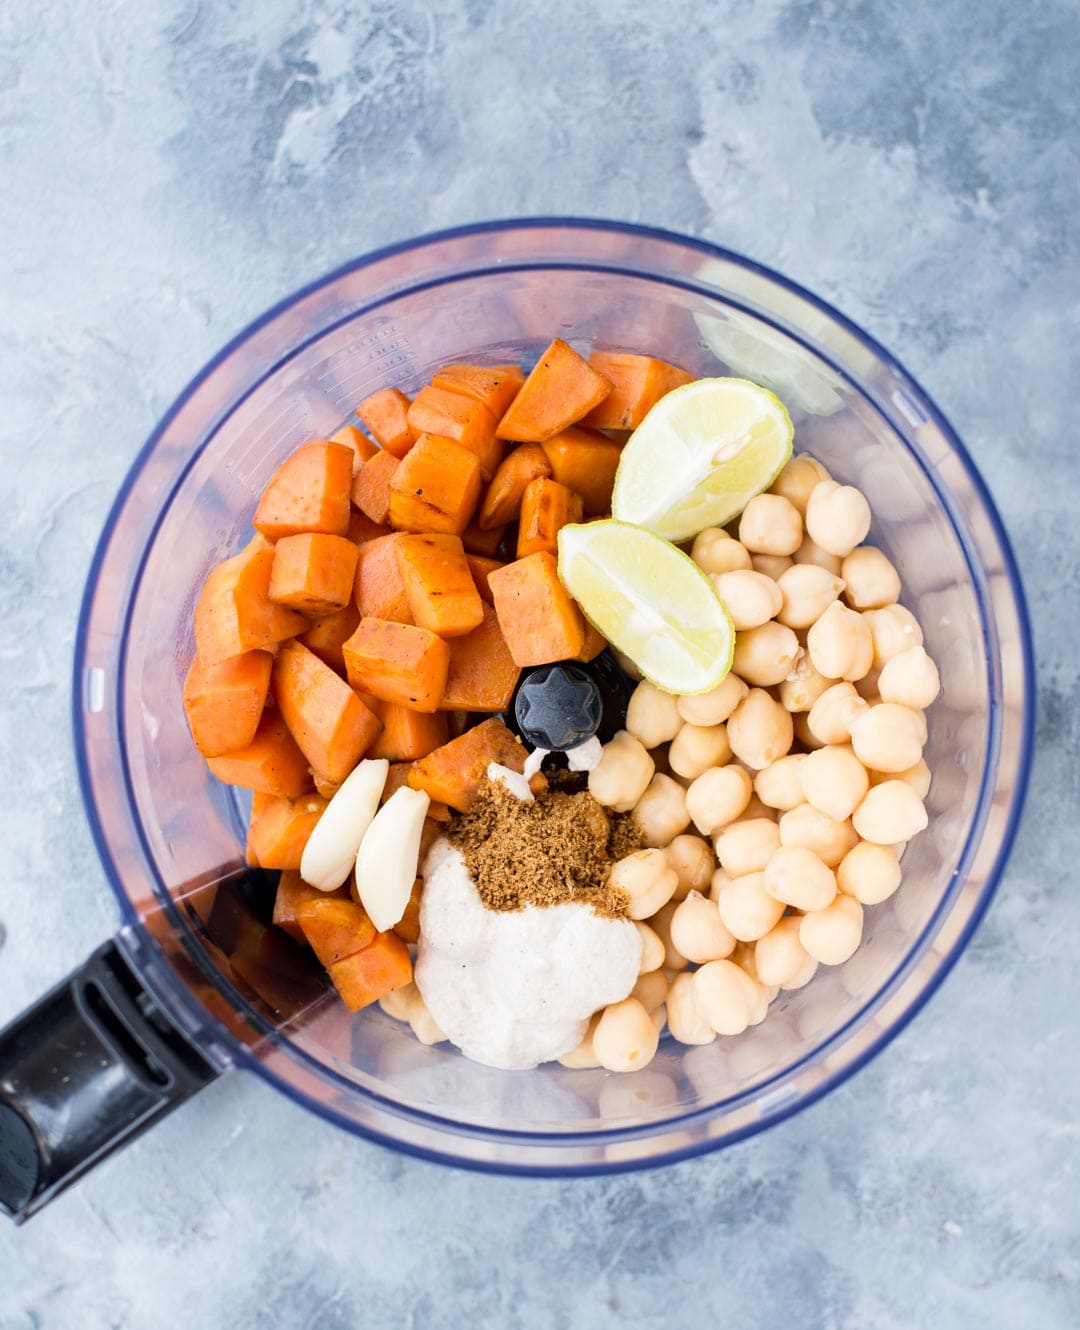 This easy Roasted Sweet Potato Hummus is creamy, delicious and has a hint of sweetness from the Sweet potato. This homemade hummus is great as a dip or as a healthy spread on wraps and sandwiches.